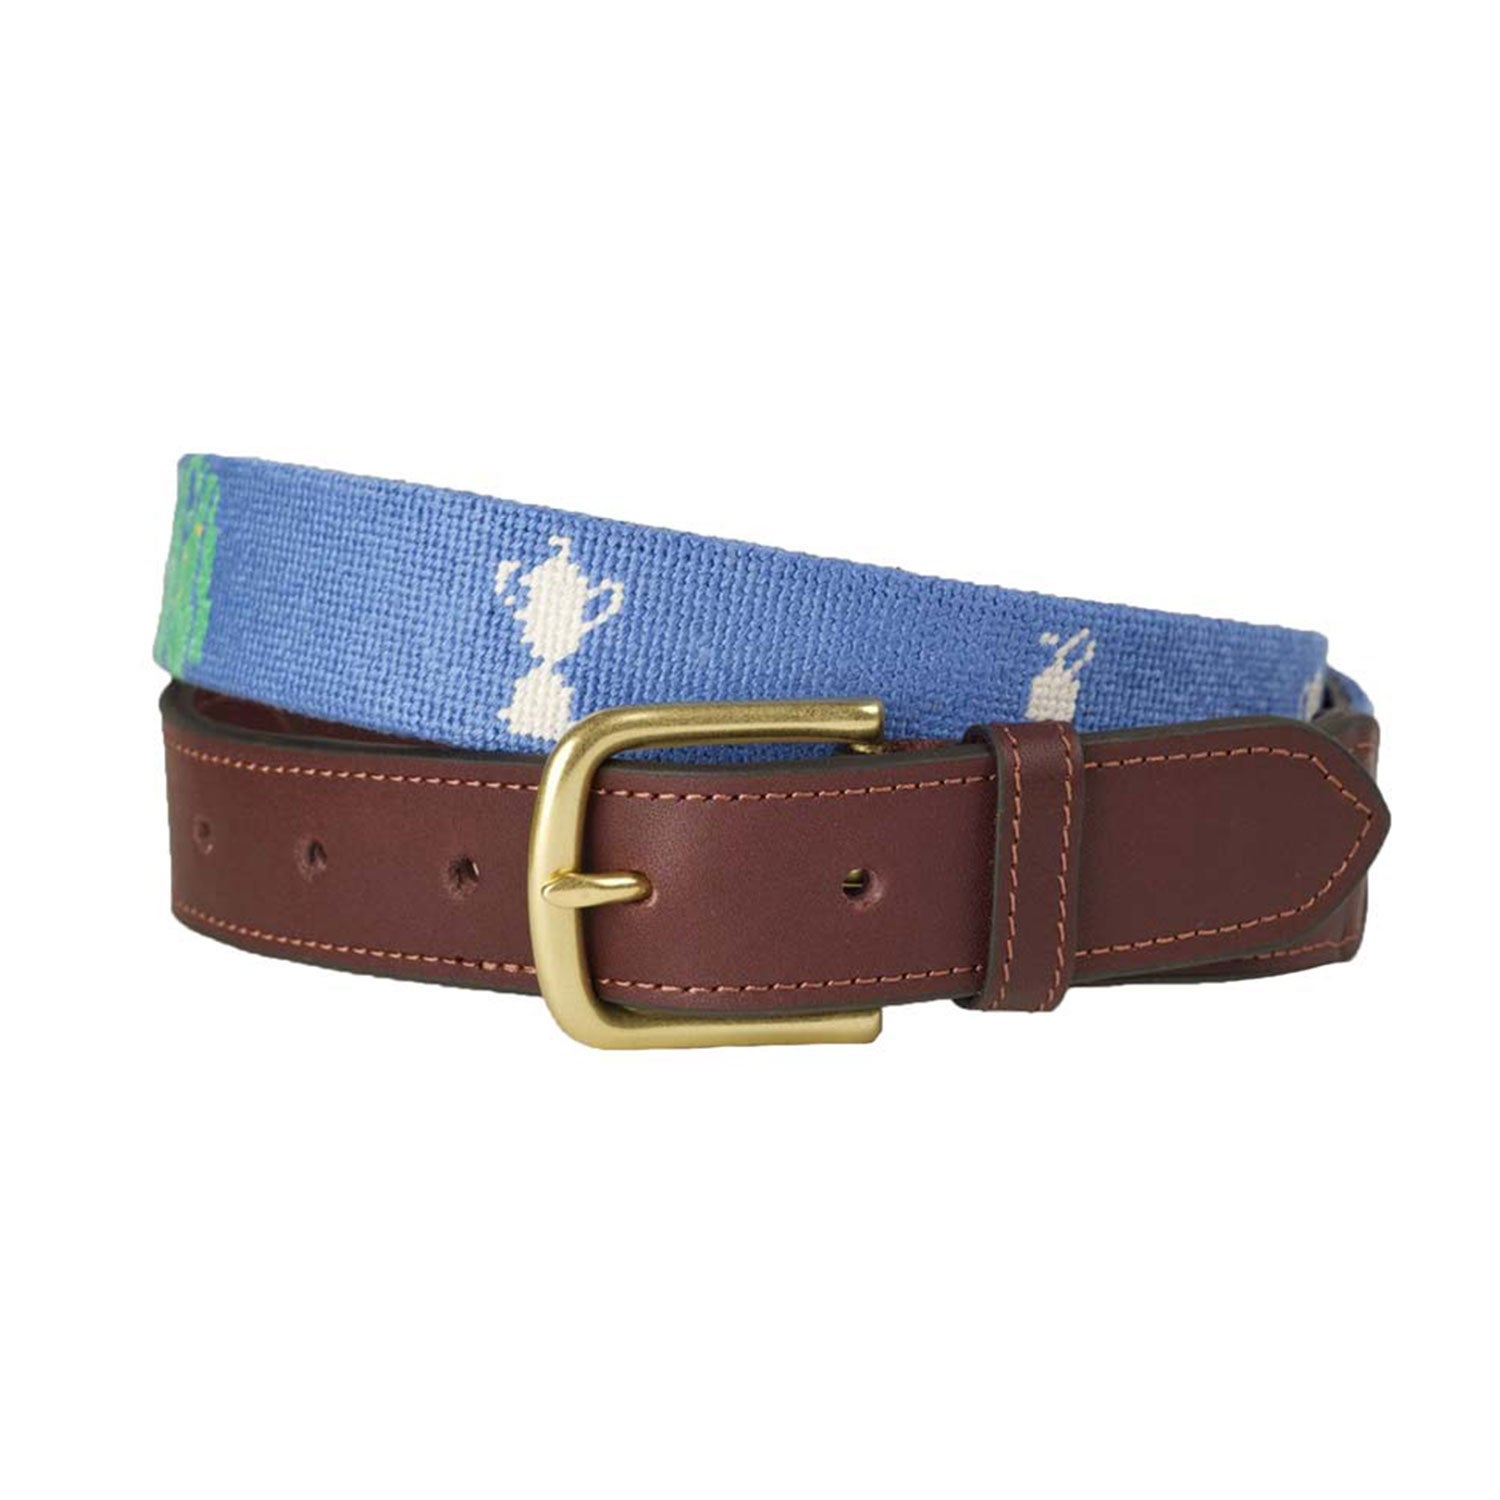 Check out these 7 colorful golf belts that are anything but basic